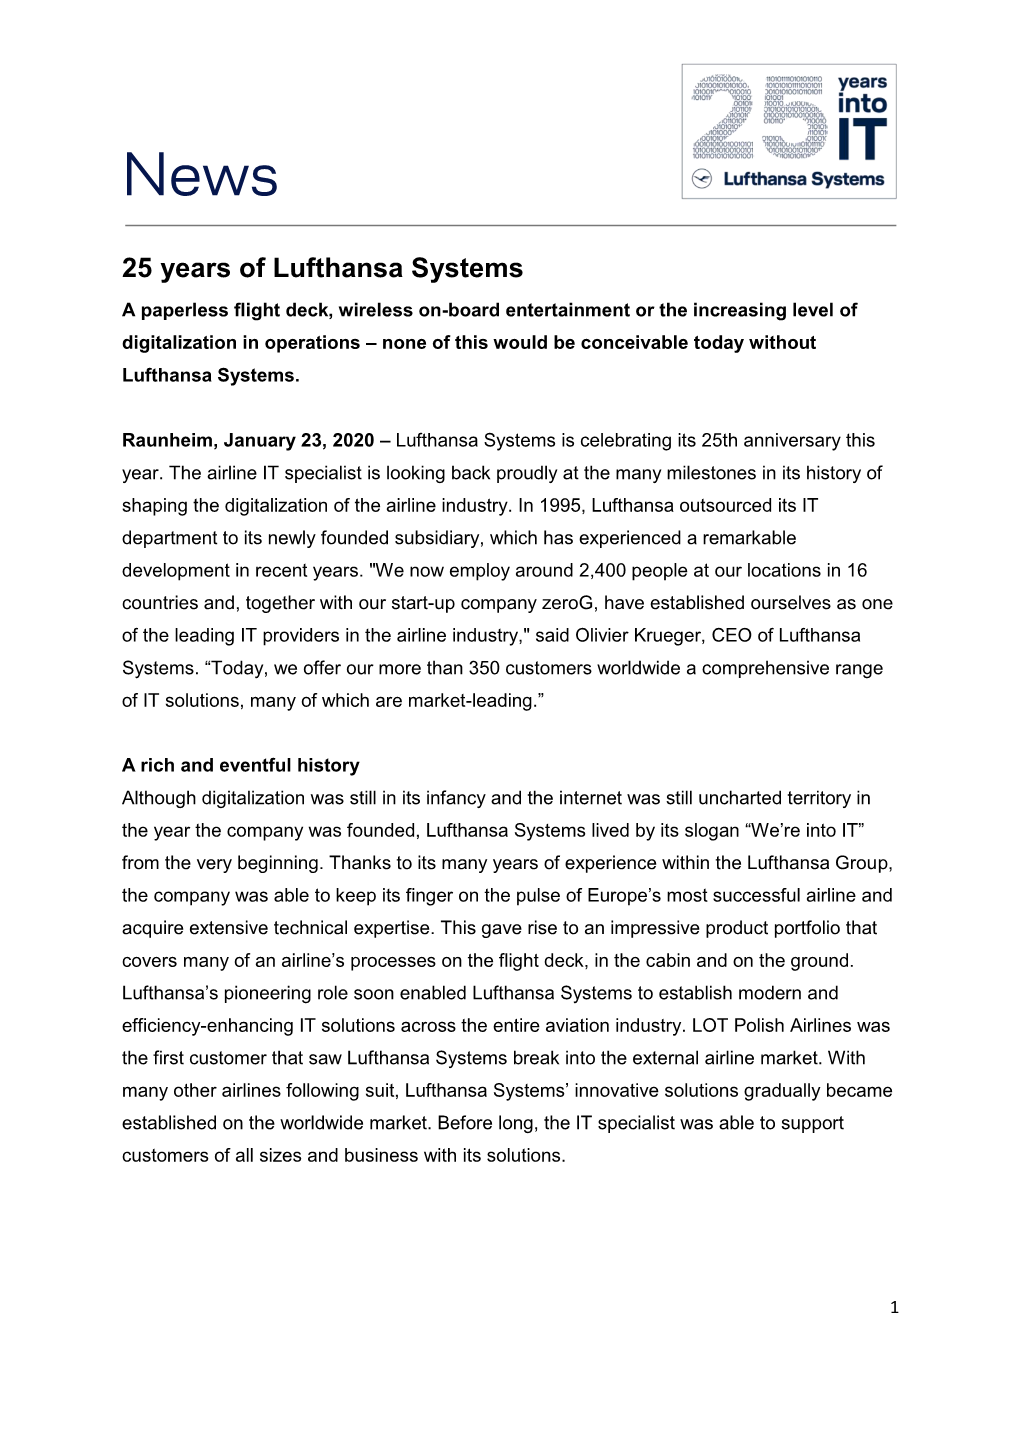 25 Years of Lufthansa Systems